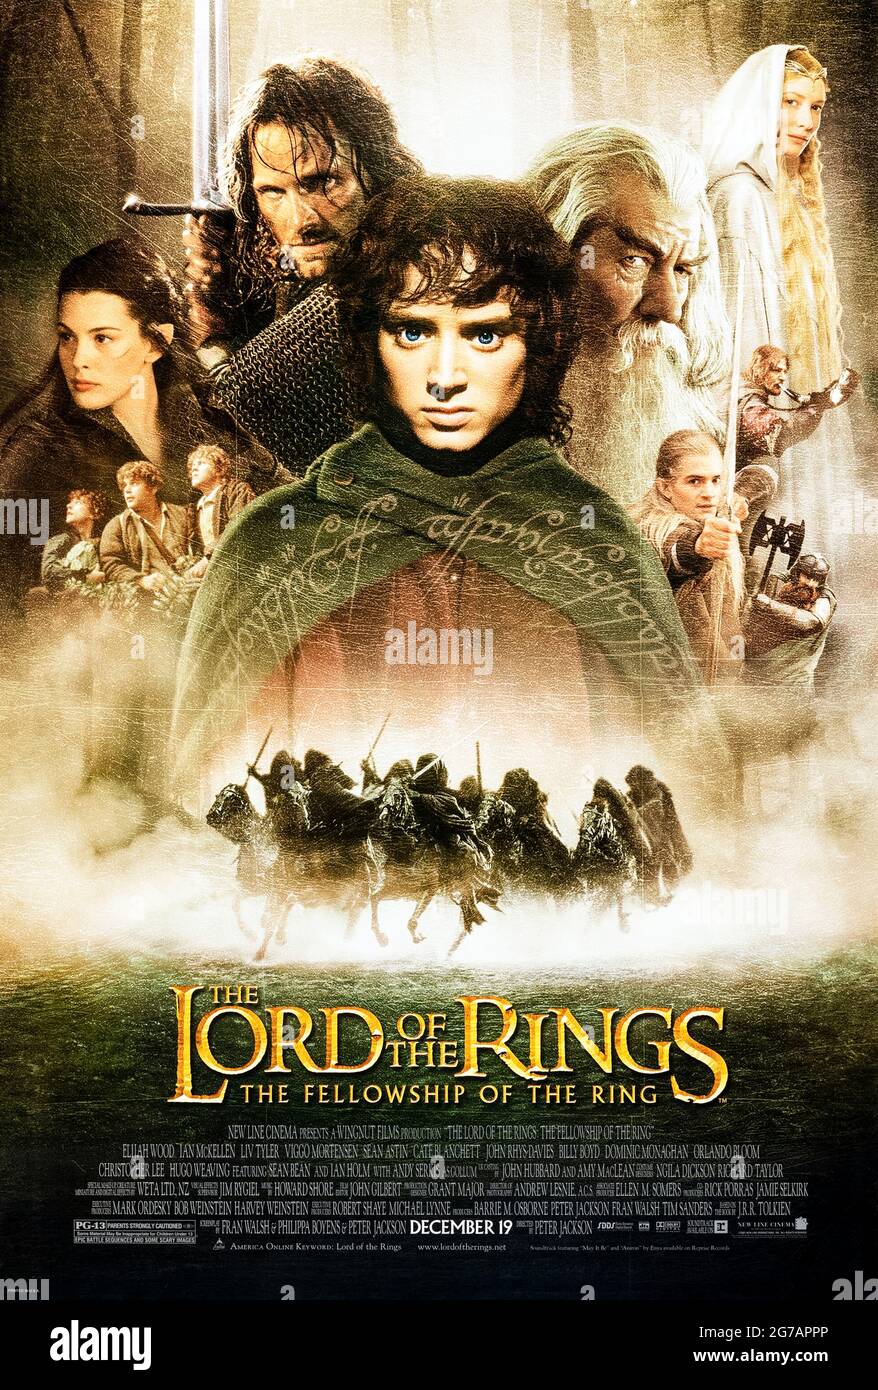 The Lord of the Rings: The Fellowship of the Ring (2001) directed by Peter Jackson and starring Elijah Wood, Ian McKellen, Orlando Bloom and Sean Bean. Epic adaptation of J.R.R. Tolkien book about a group who go on a quest to destroy a dangerous ring. Photograph of an original 2001 US one sheet poster ***EDITORIAL USE ONLY***. Credit: BFA / New Line Cinema Stock Photo